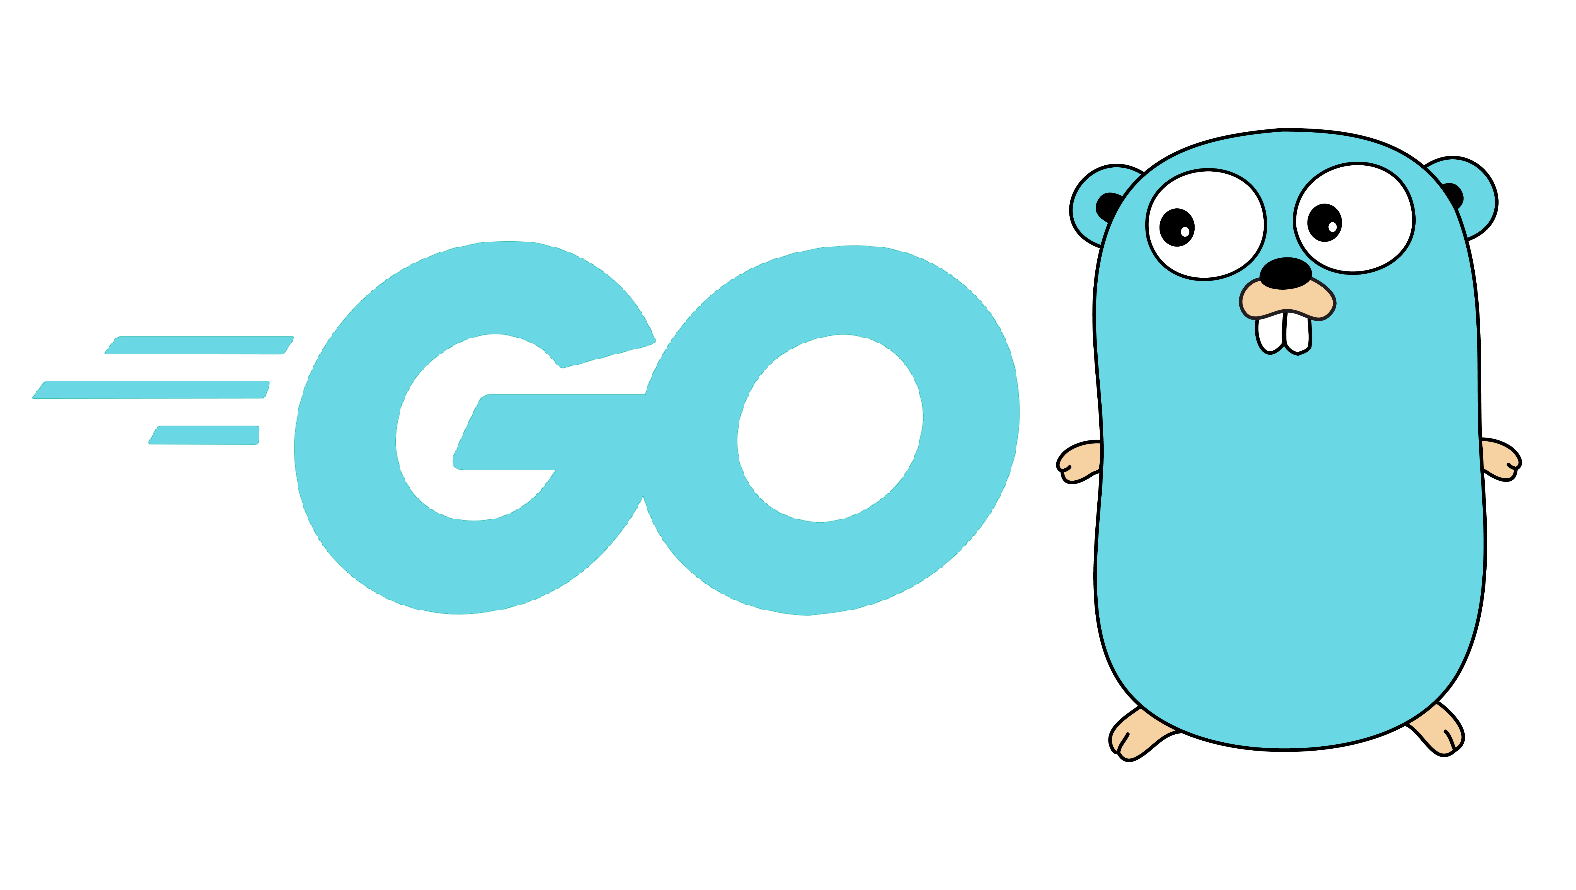 Some useful Golang links